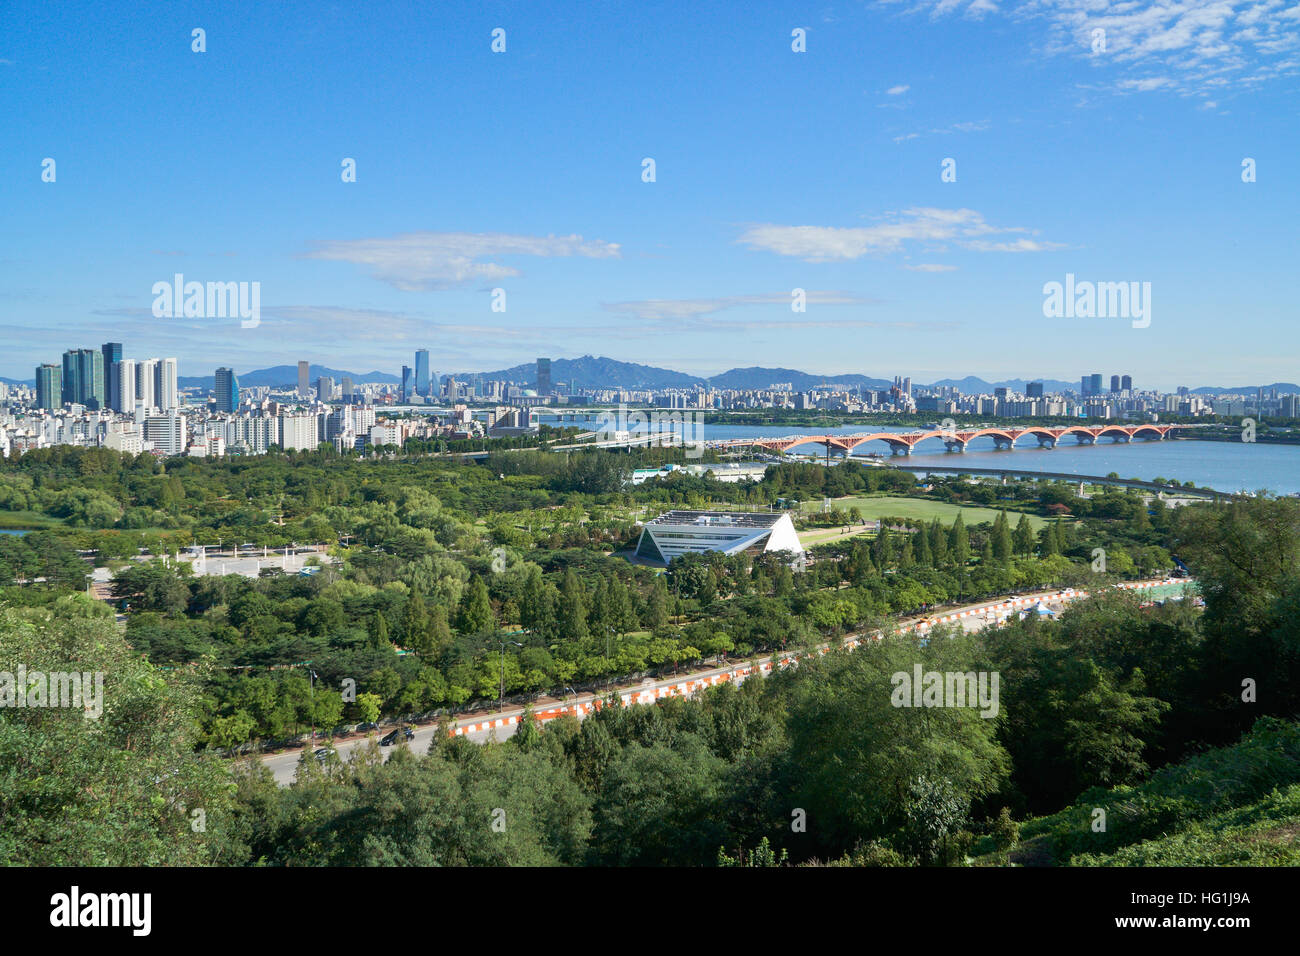 CItyscape of Mapo-gu with Skyscrapers, World Cup Park and Han-river in Seoul, Korea Stock Photo